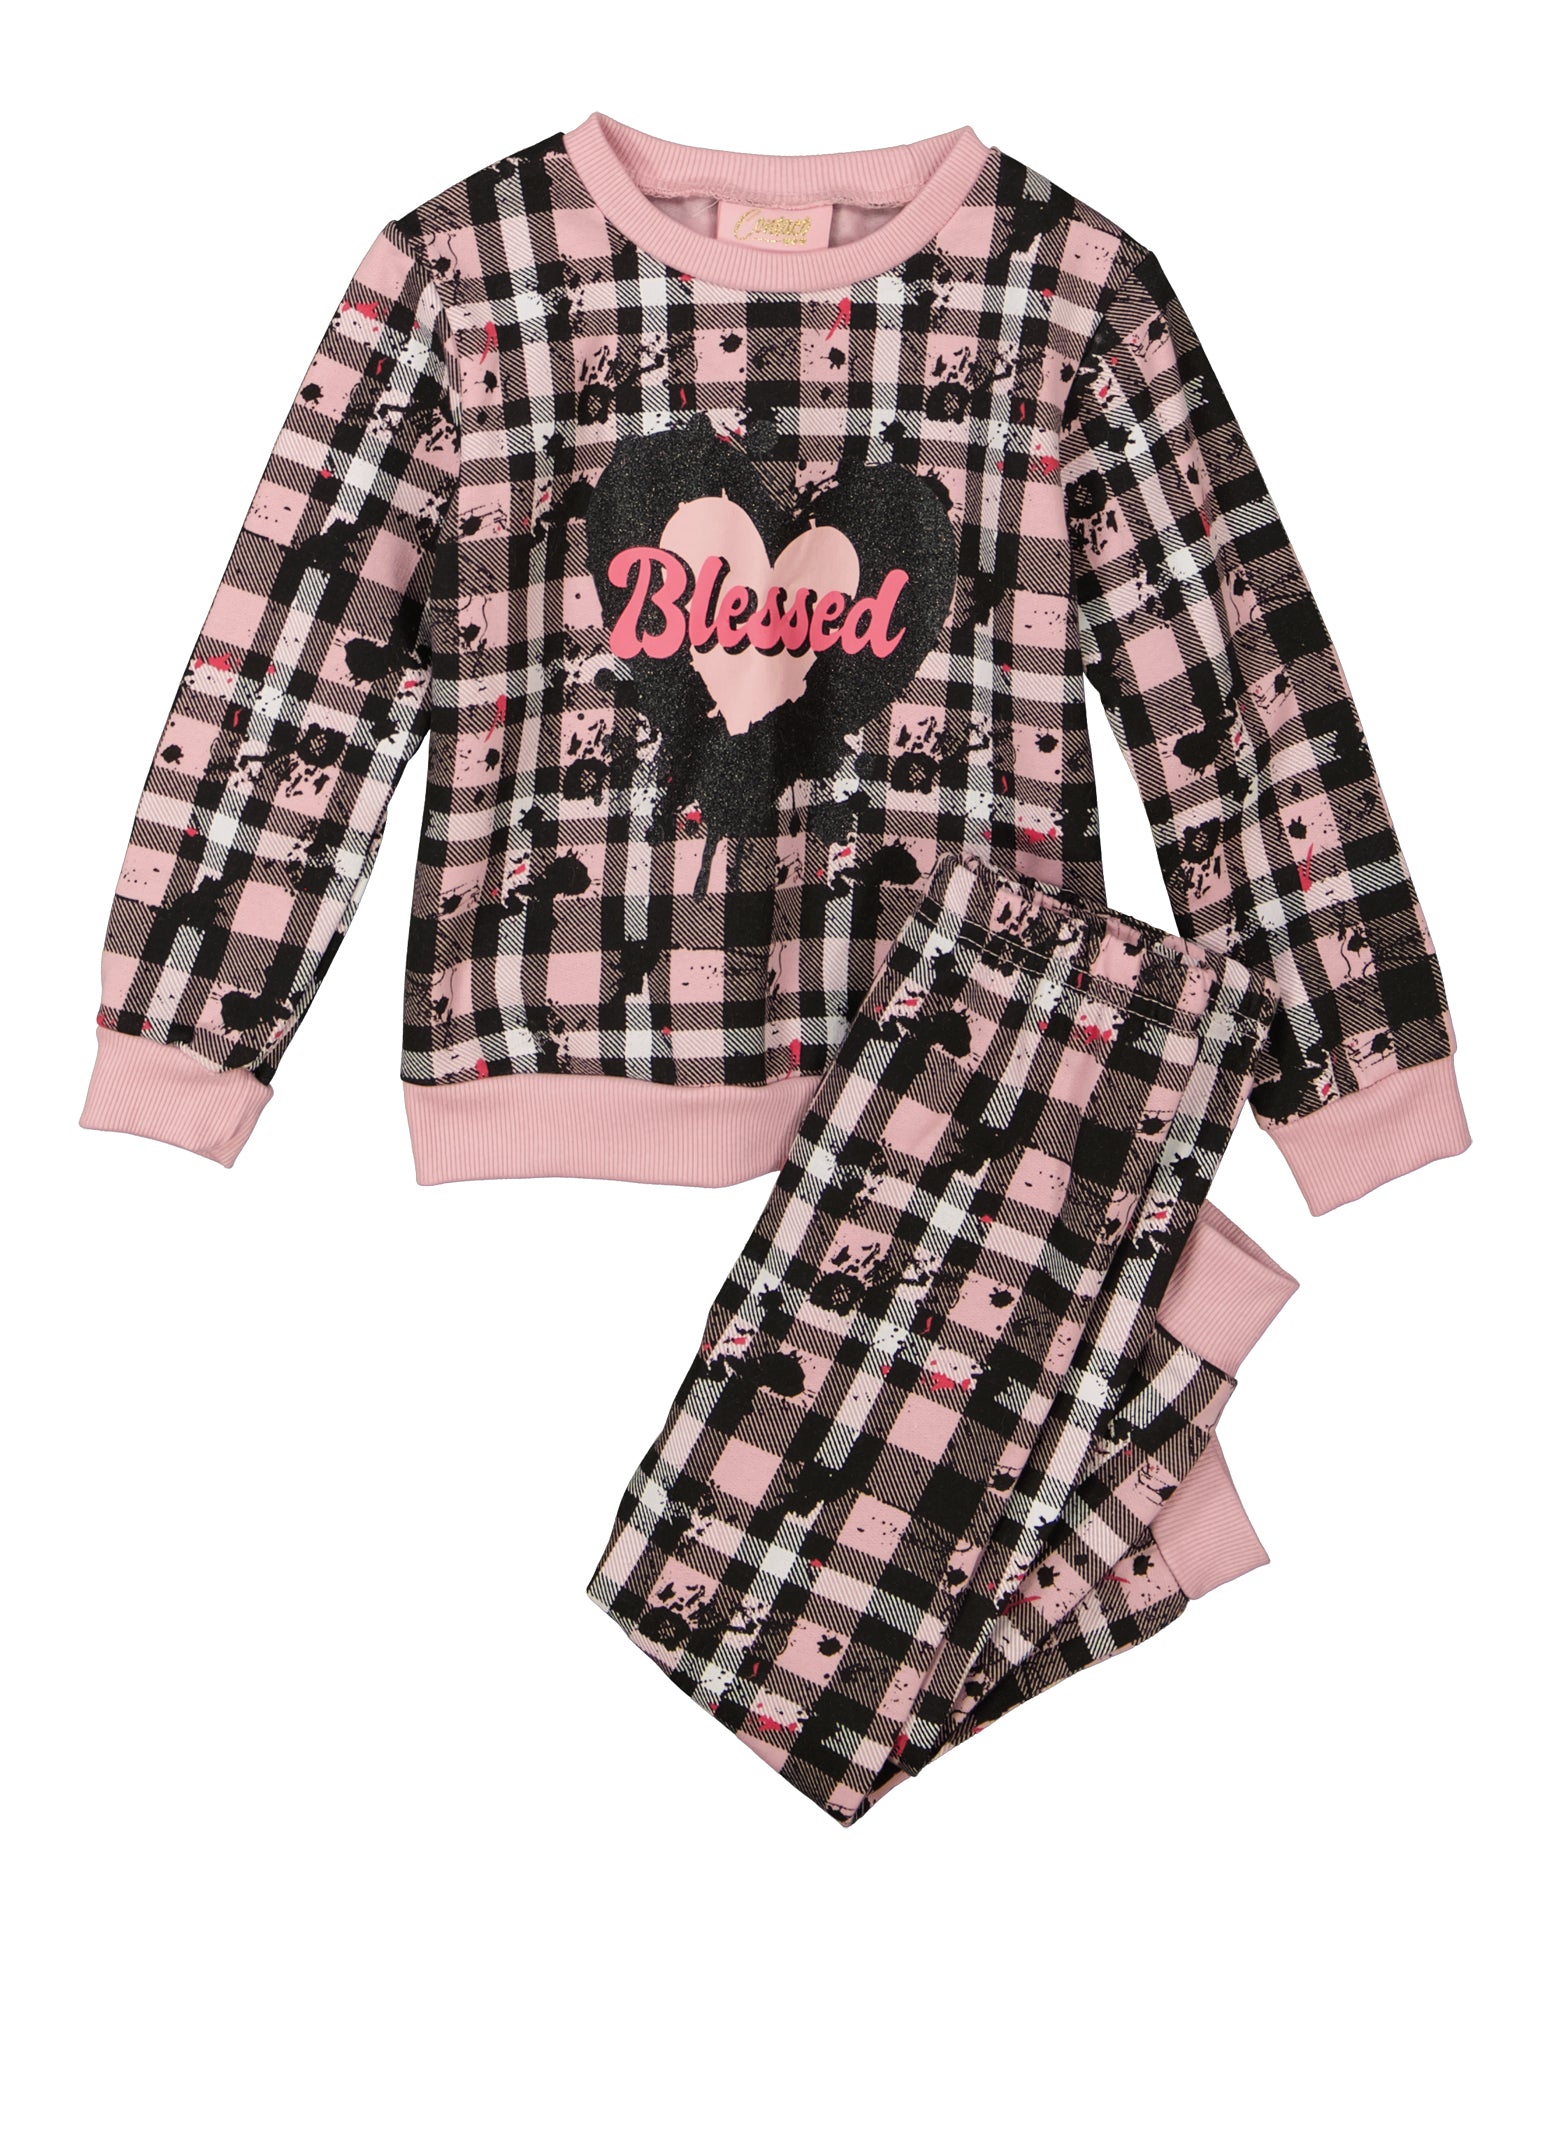 Toddler Girls Blessed Mixed Print Sweatshirt and Joggers - Black